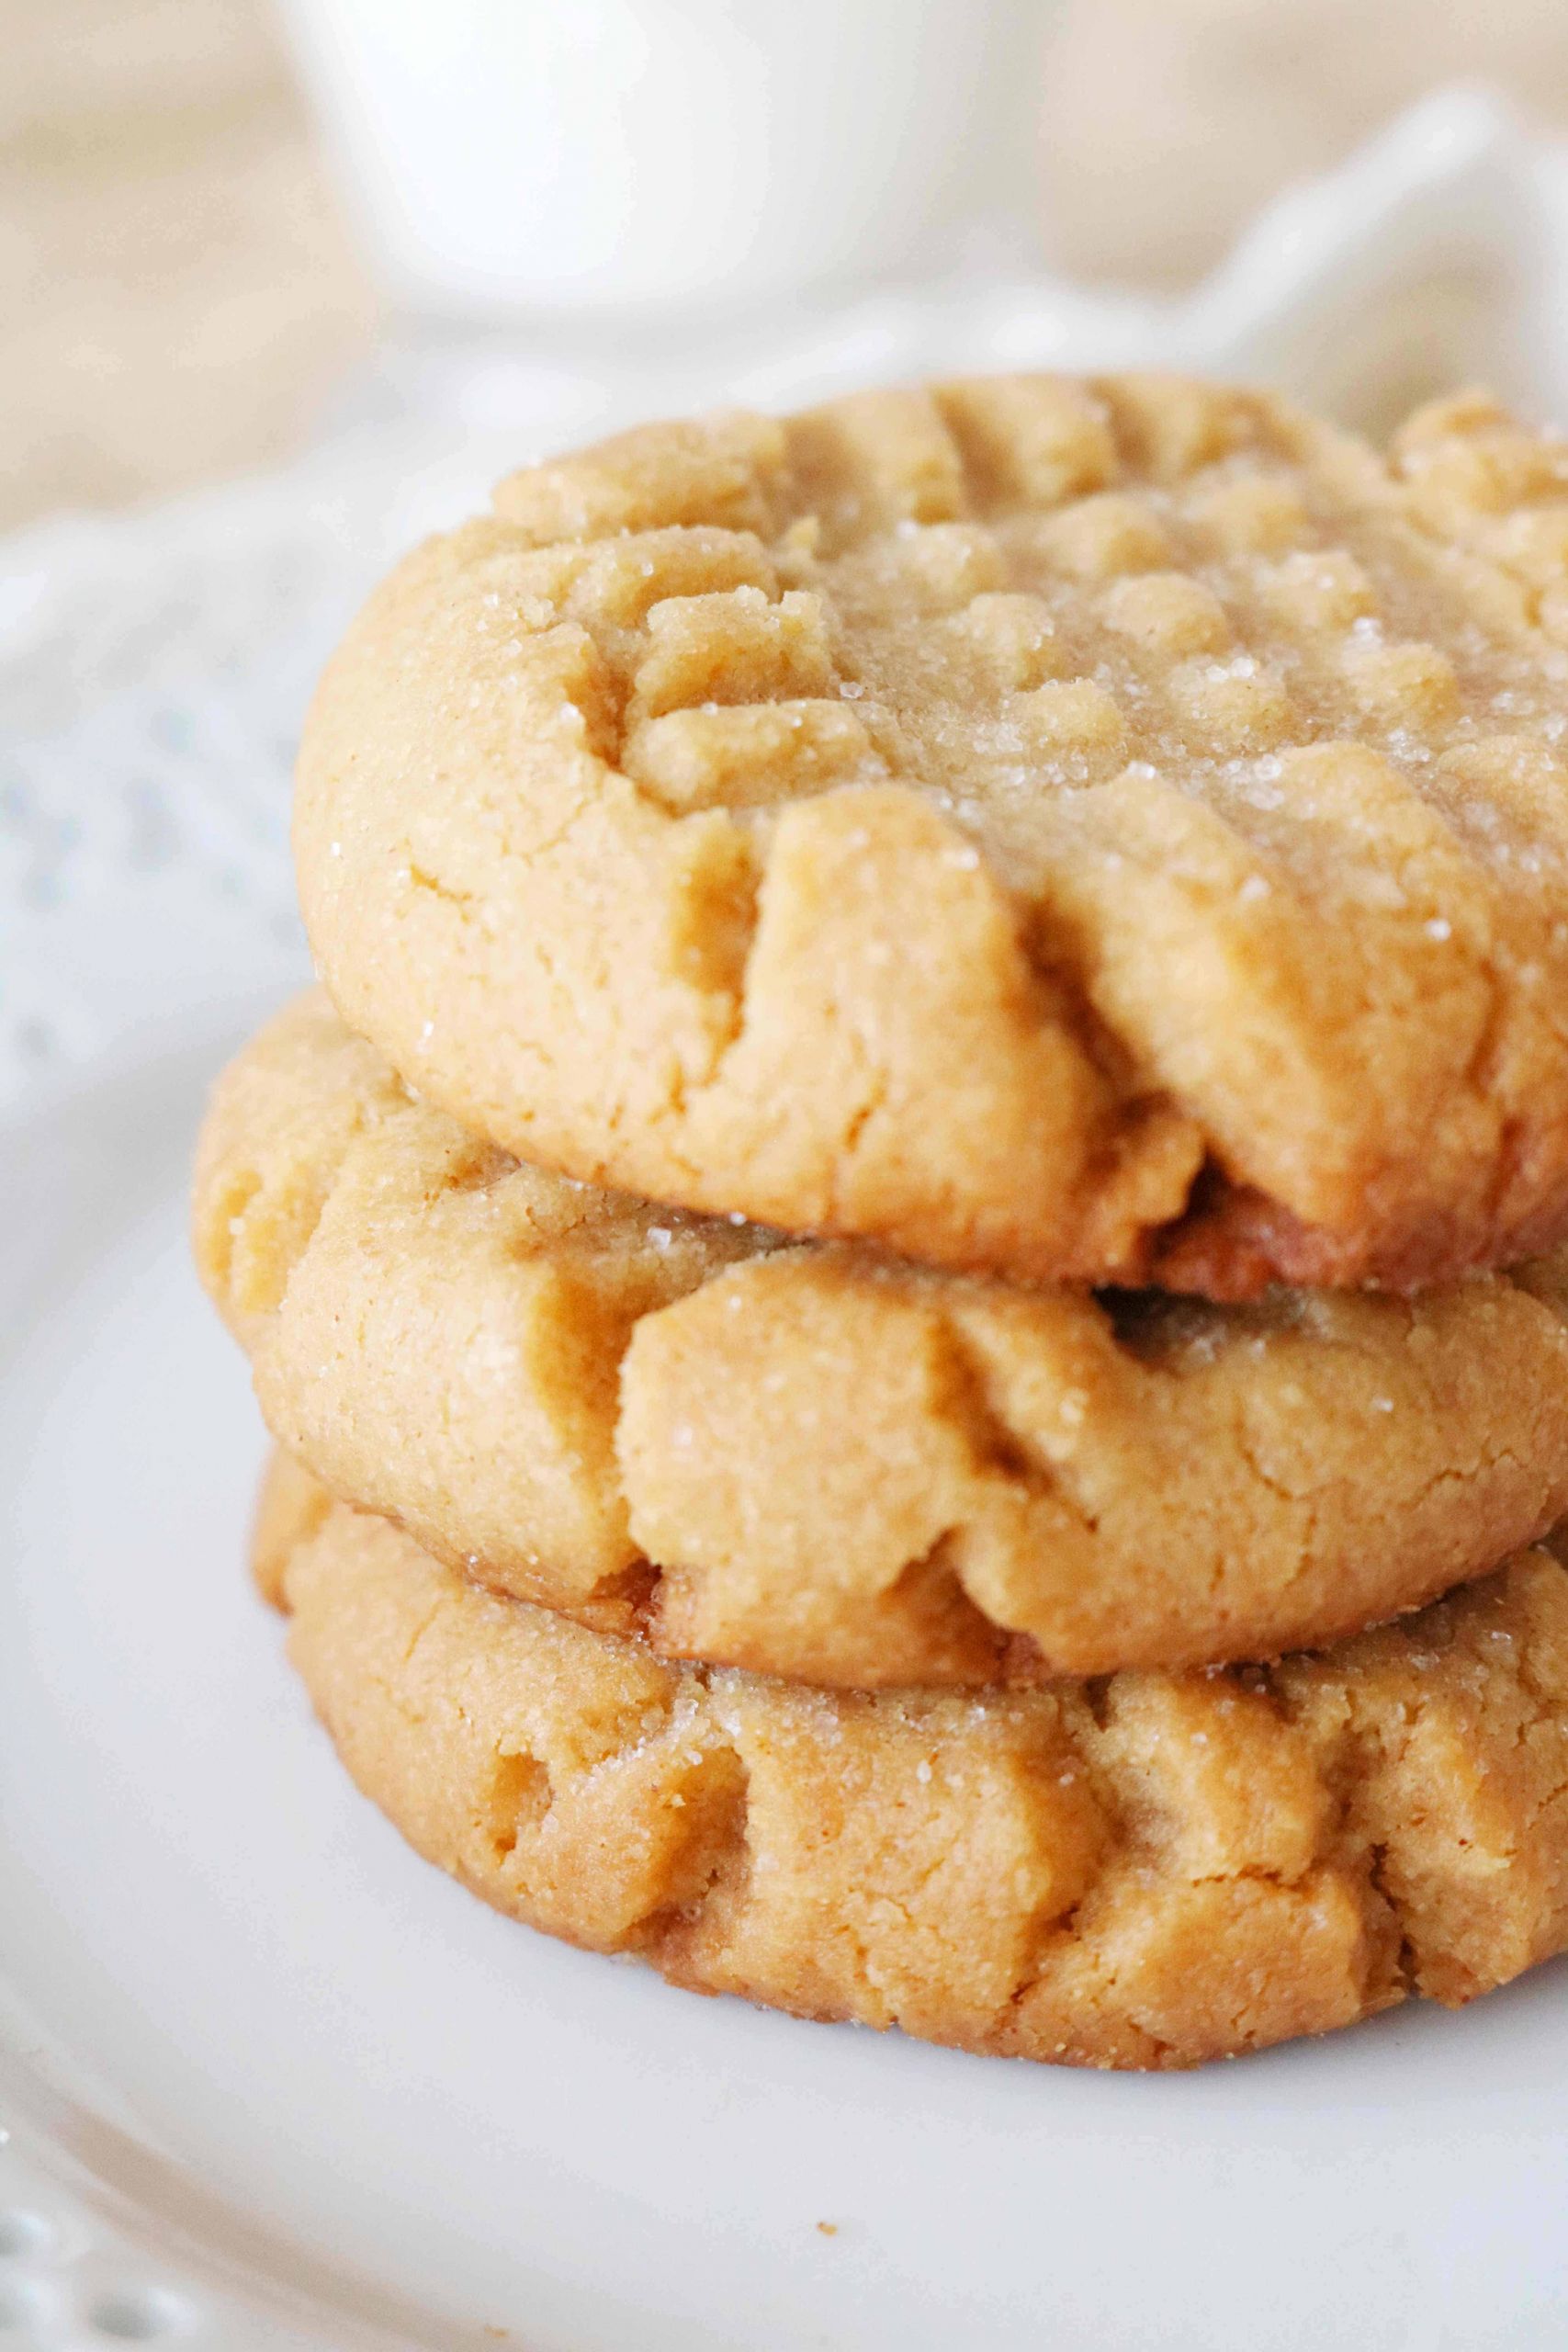 Best Chewy Peanut Butter Cookies
 The Easiest Chewy Peanut Butter Cookies The Anthony Kitchen